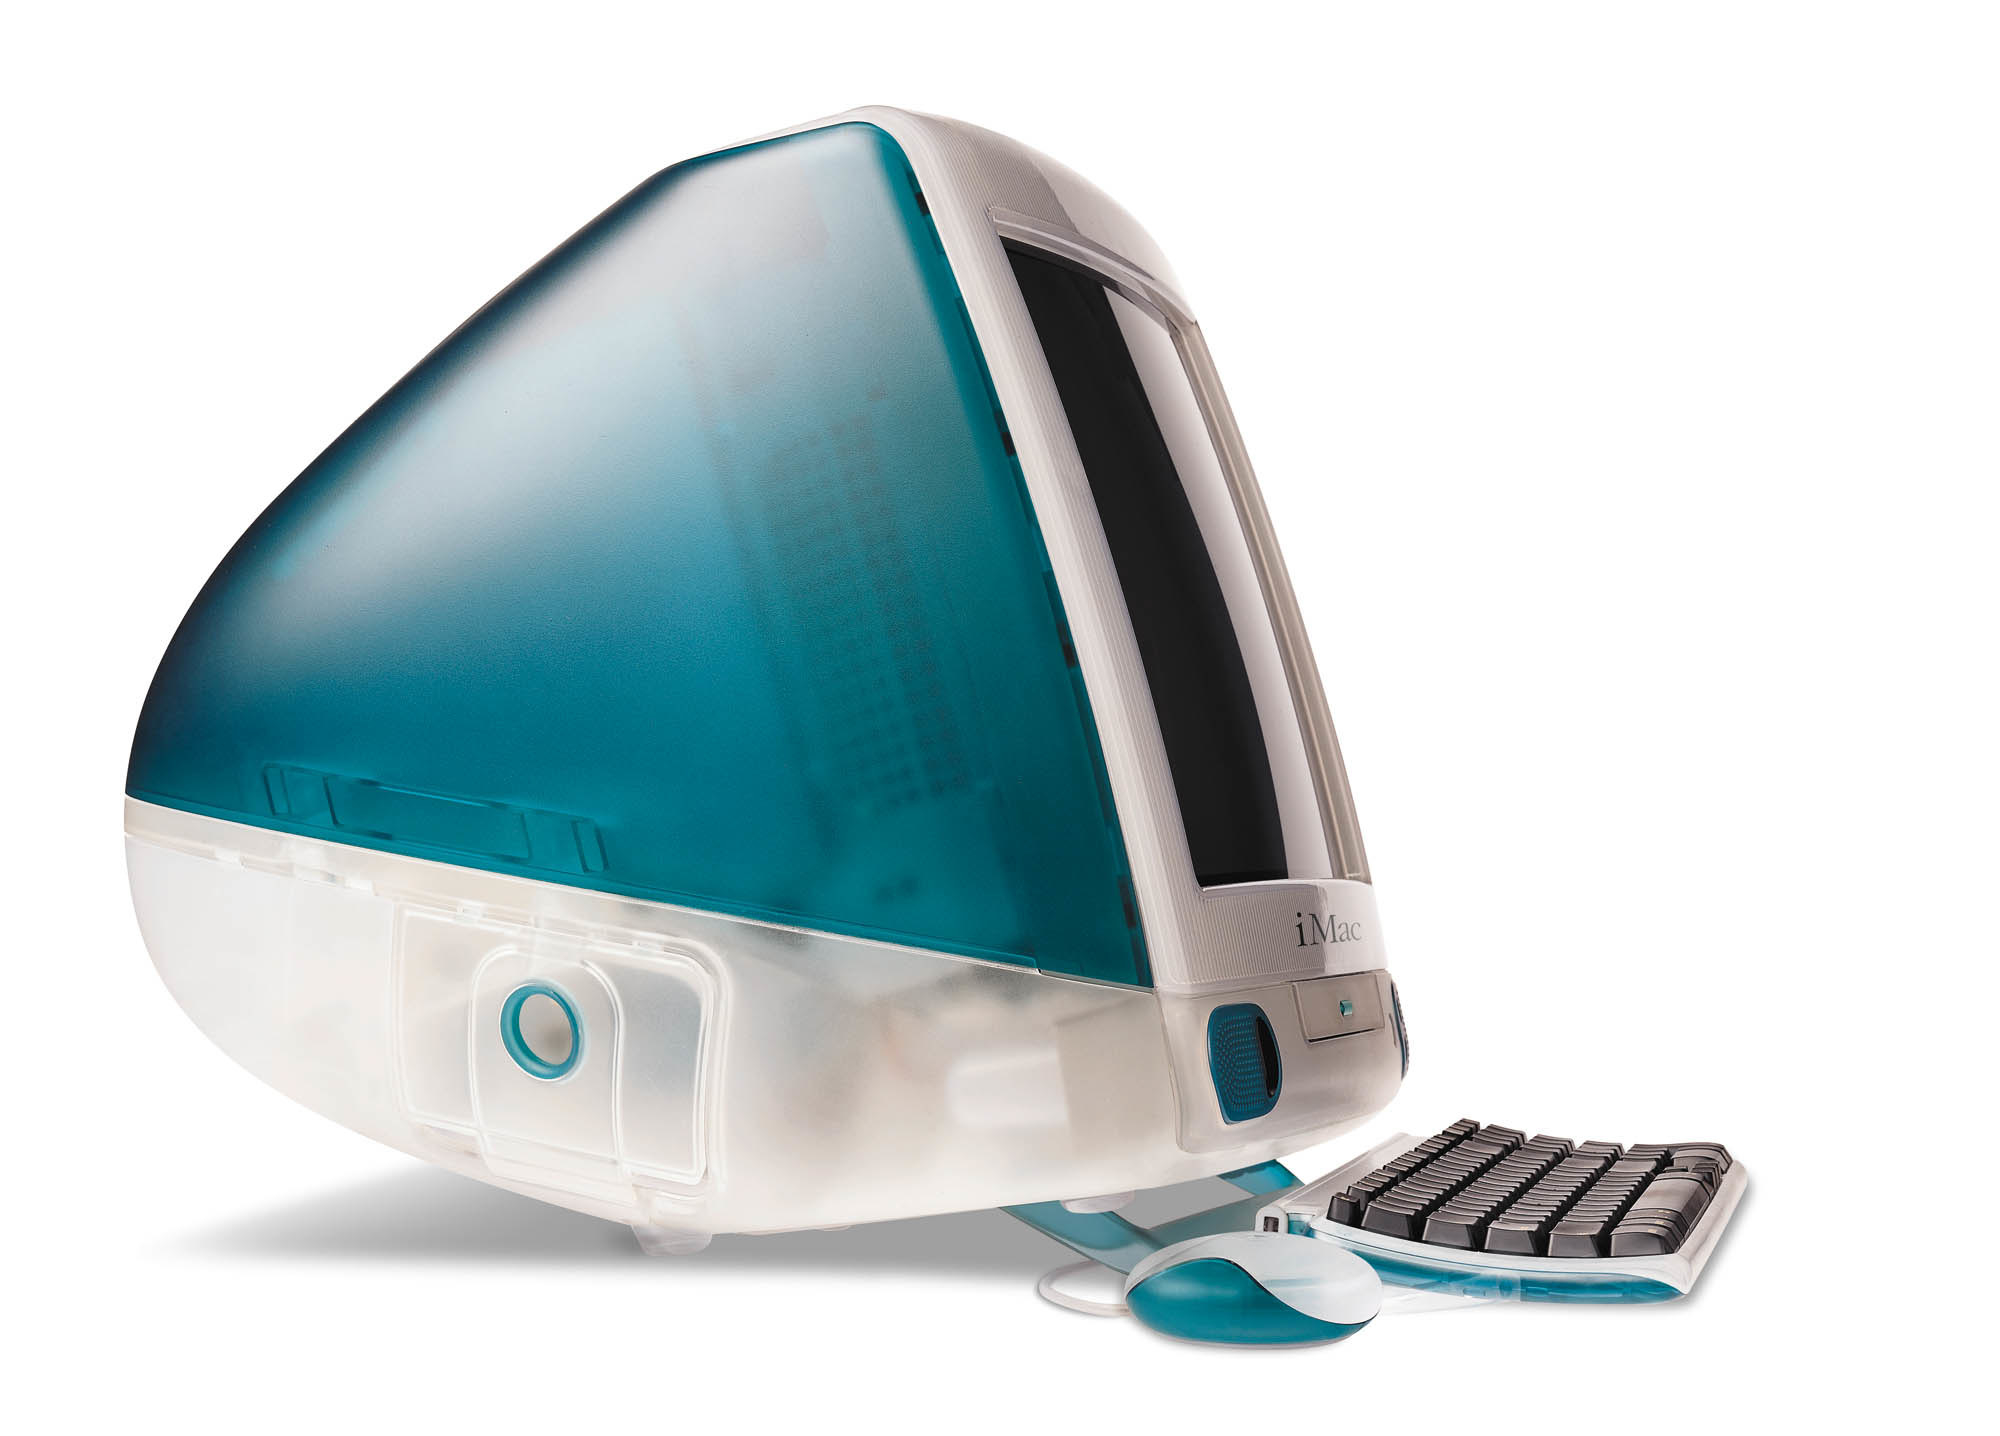 A photo of a teal 1998 iMac